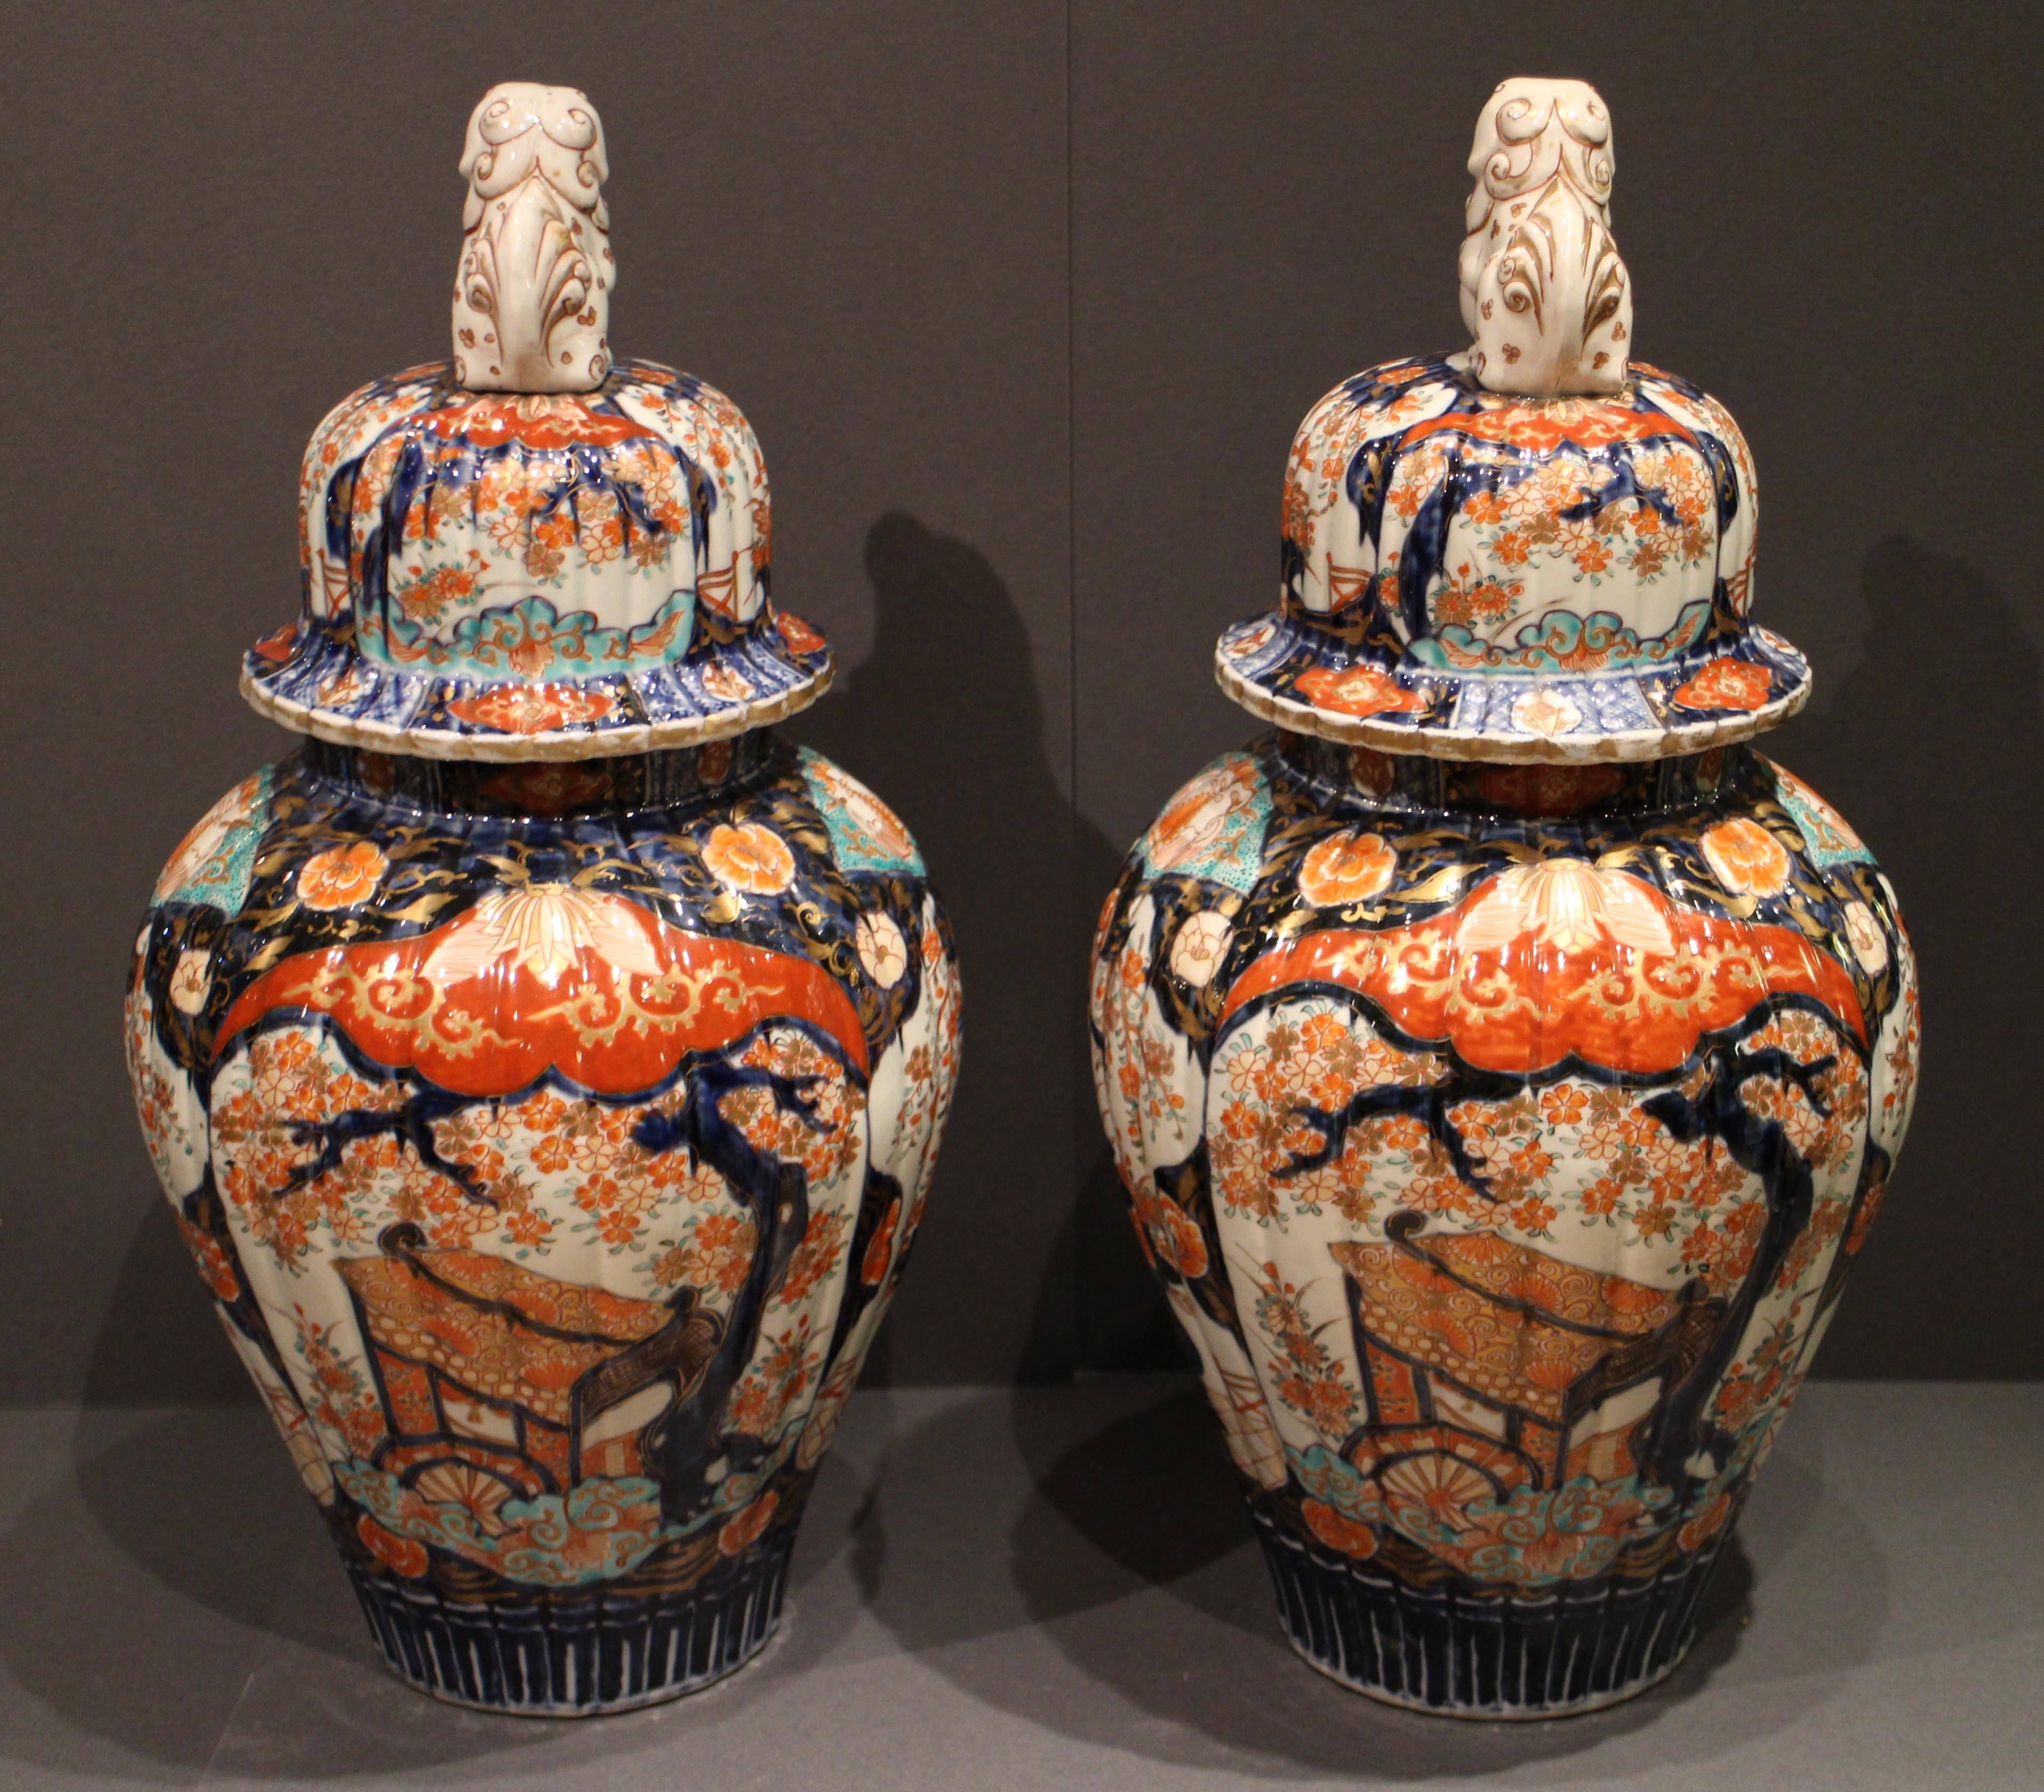 Pair of Antique Japanese Imari Vases and Covers Decorated in Blue and Orange 2